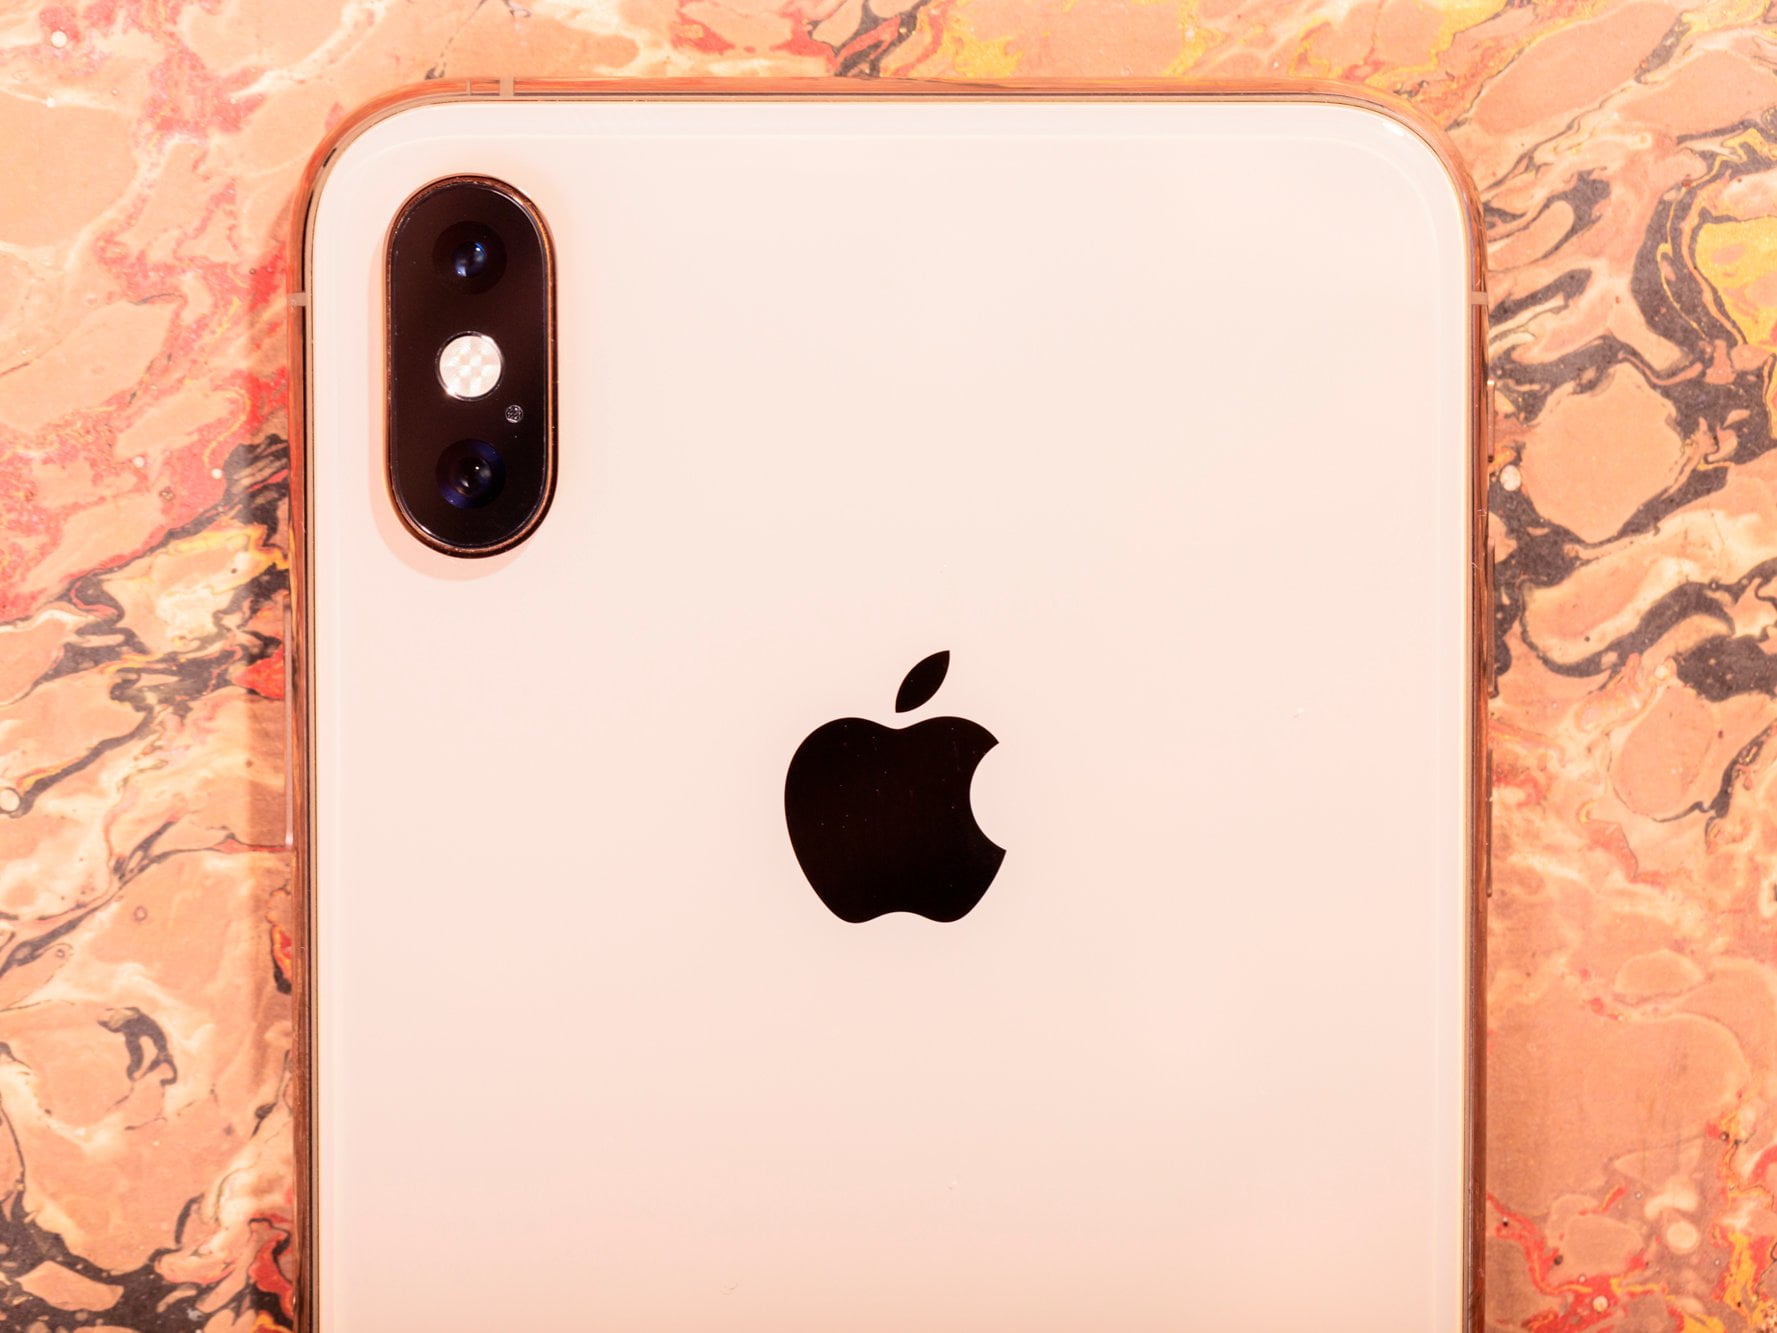 Apple sells many different iPhone models – here’s how much they all cost